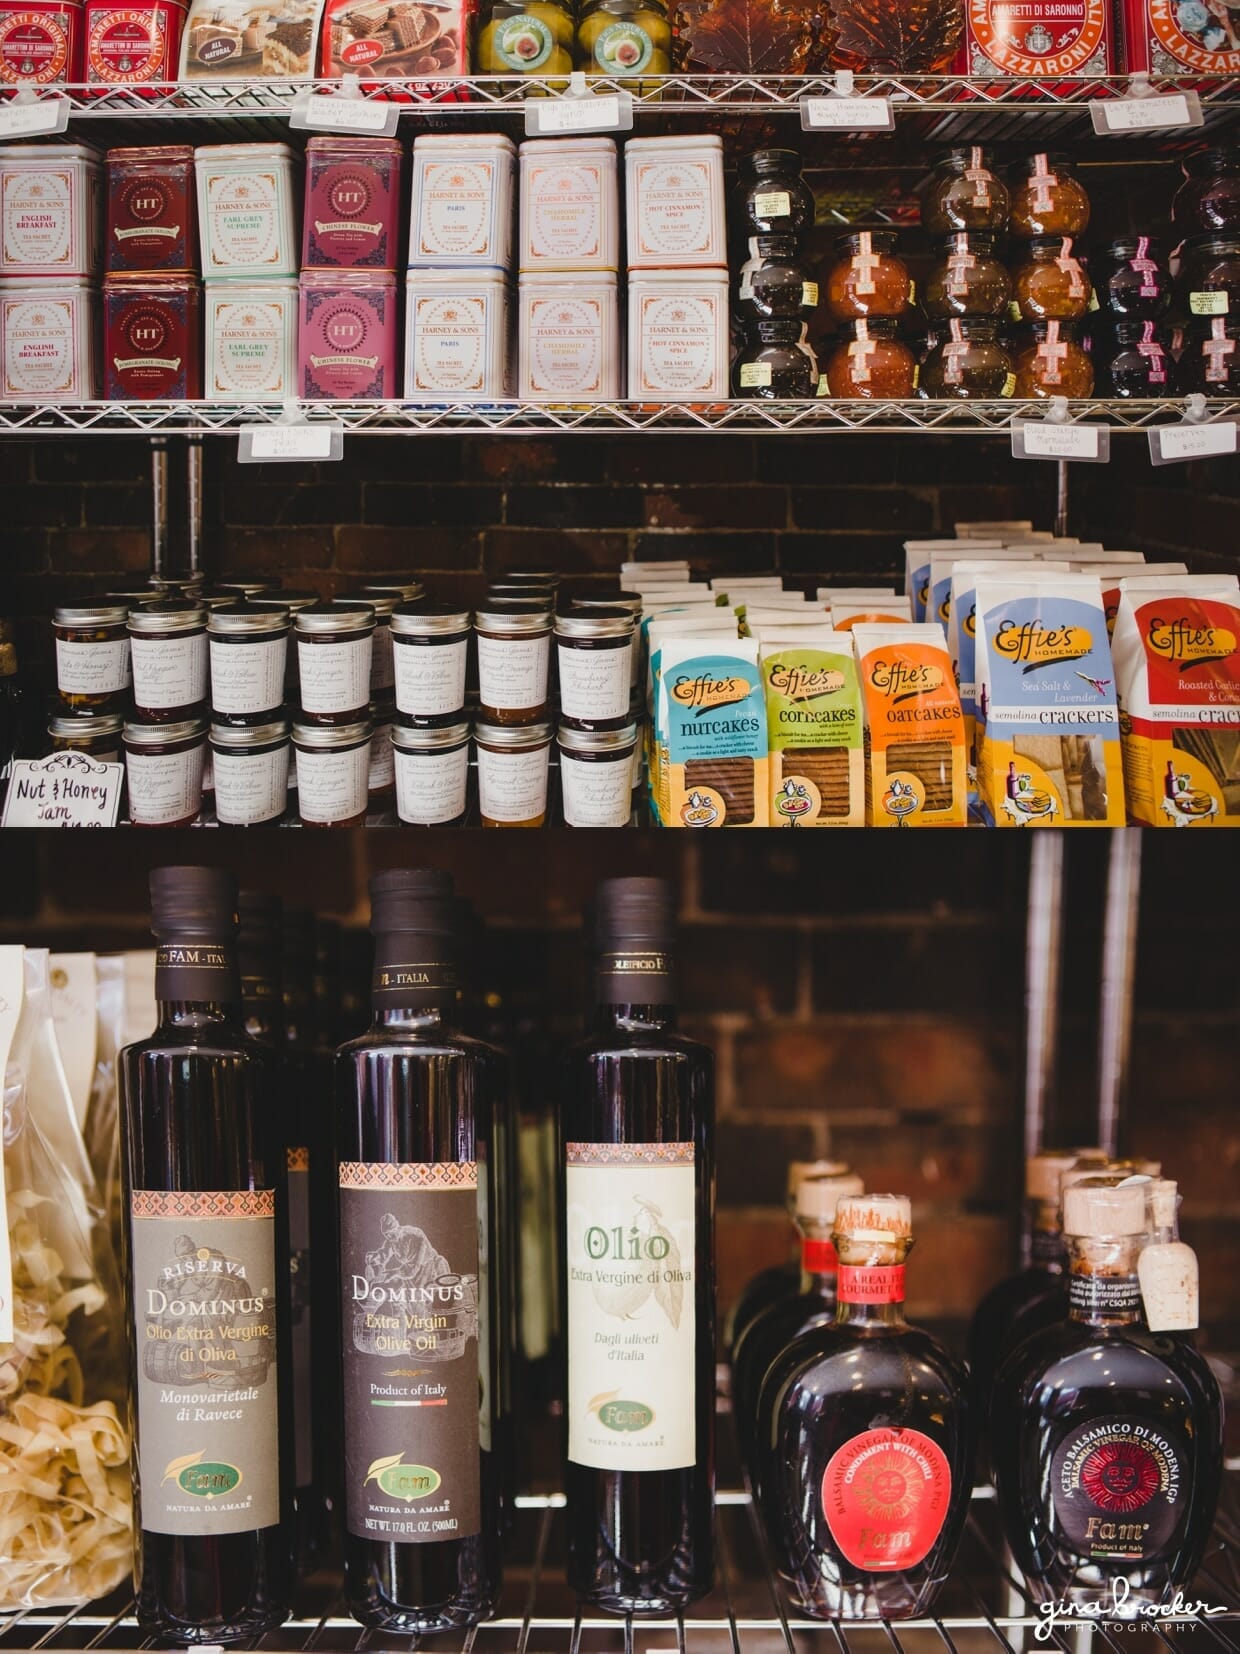 Find artisan honeys, jams, teas and more at a little french cafe on Newbury Street, Boston